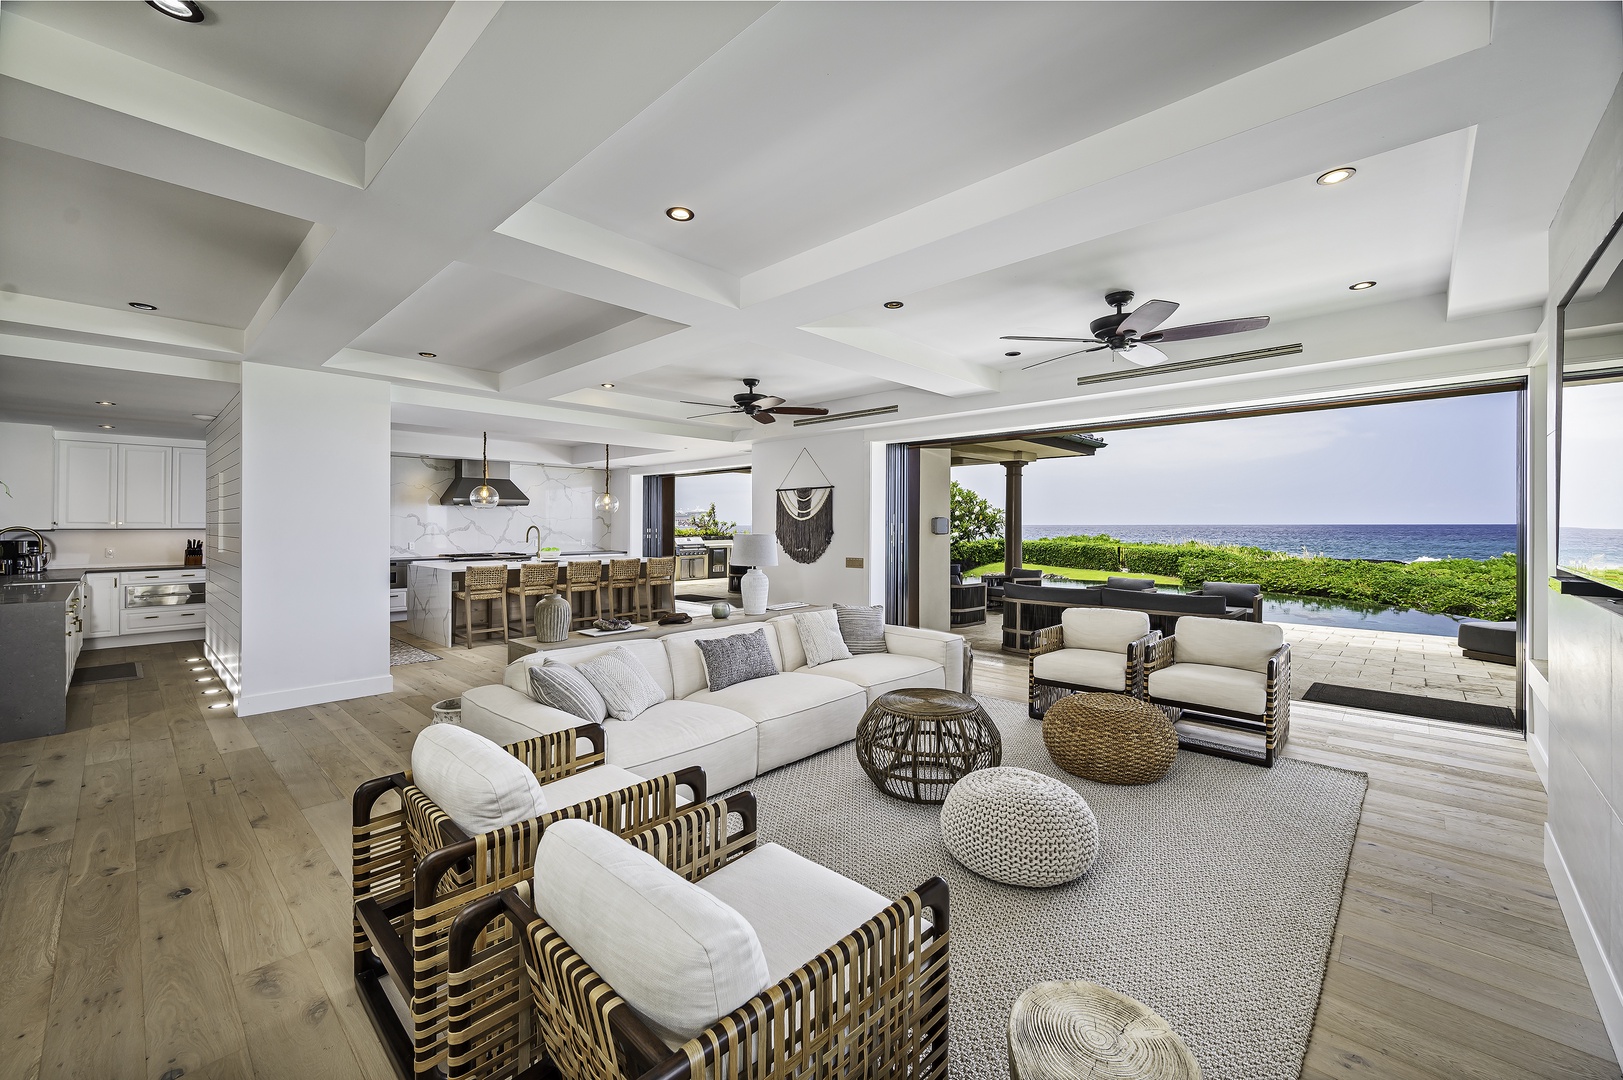 Kailua Kona Vacation Rentals, Alohi Kai Estate • - Open concept living room with built in 80 inch TV, Restoration Hardware furniture from their Luxury Beach Edition